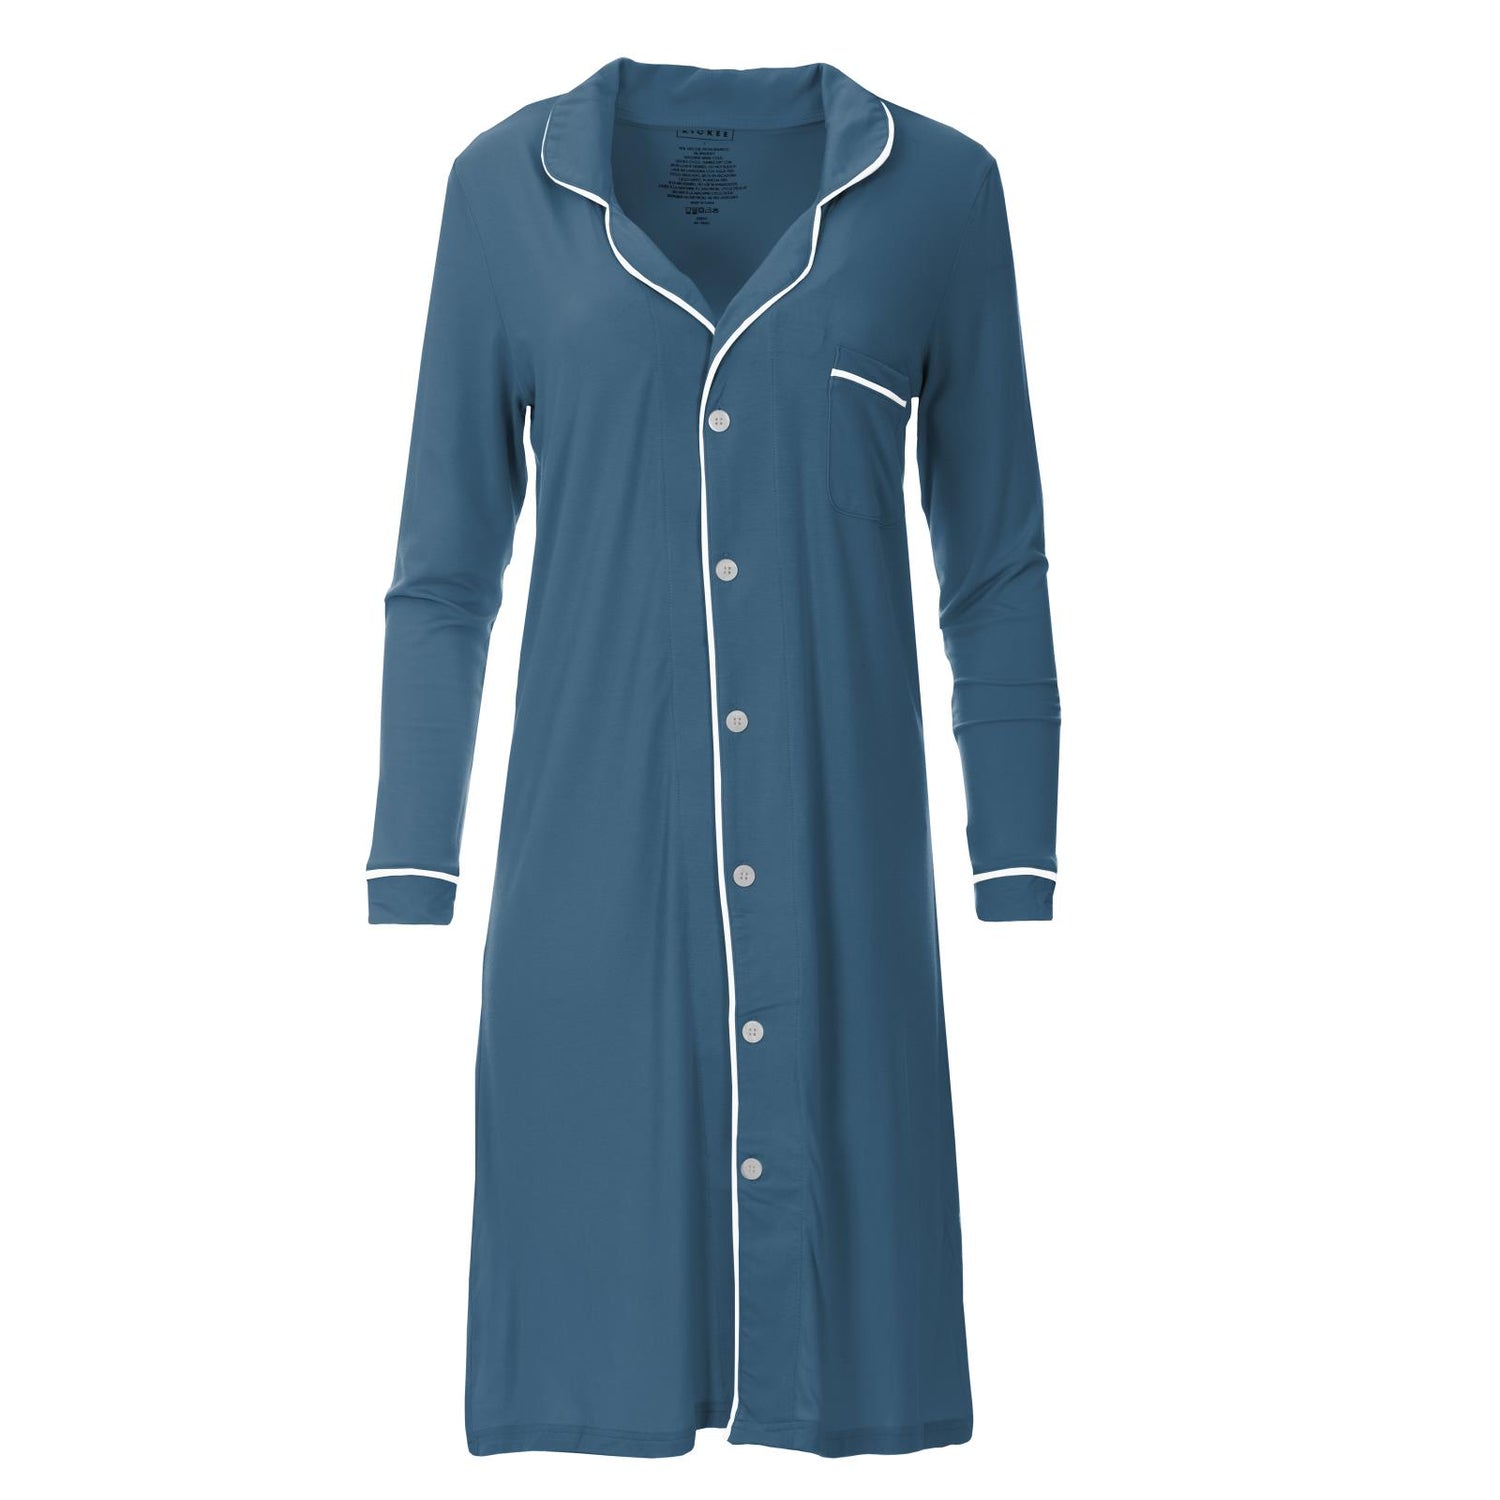 Women's Long Sleeve Button Down Nightshirt in Deep Sea with Natural